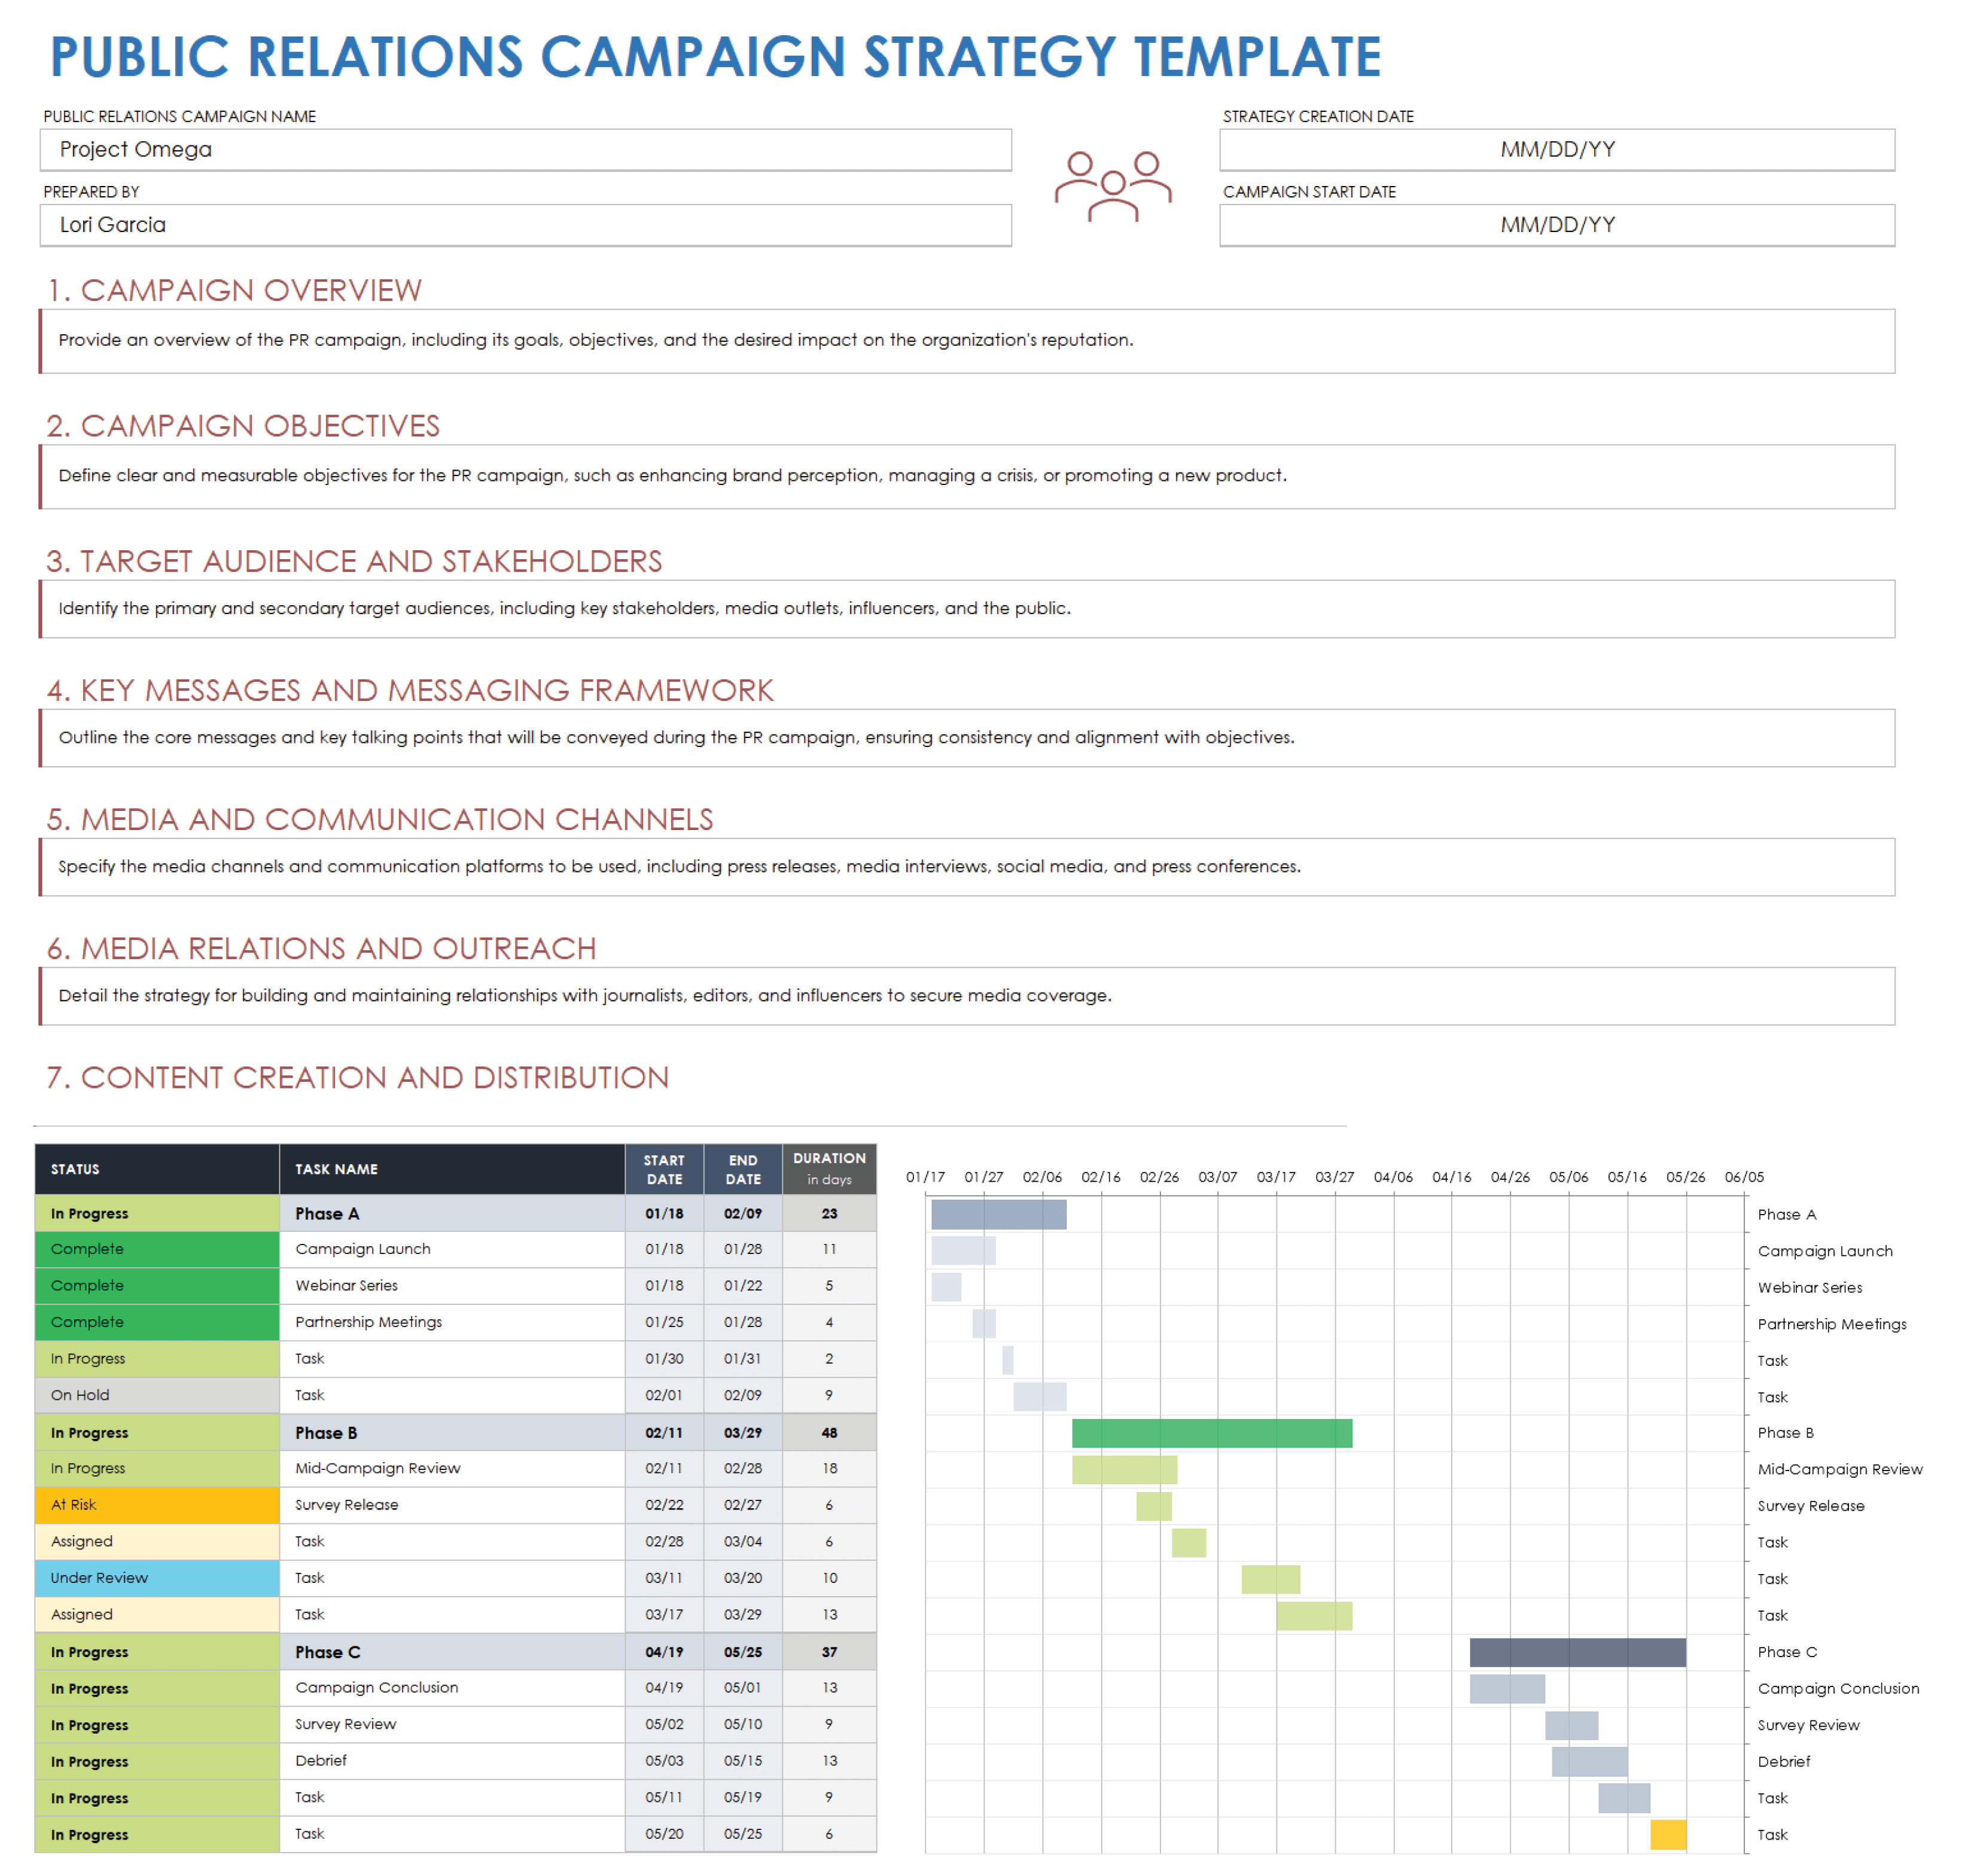 Public Relations Campaign Strategy Template